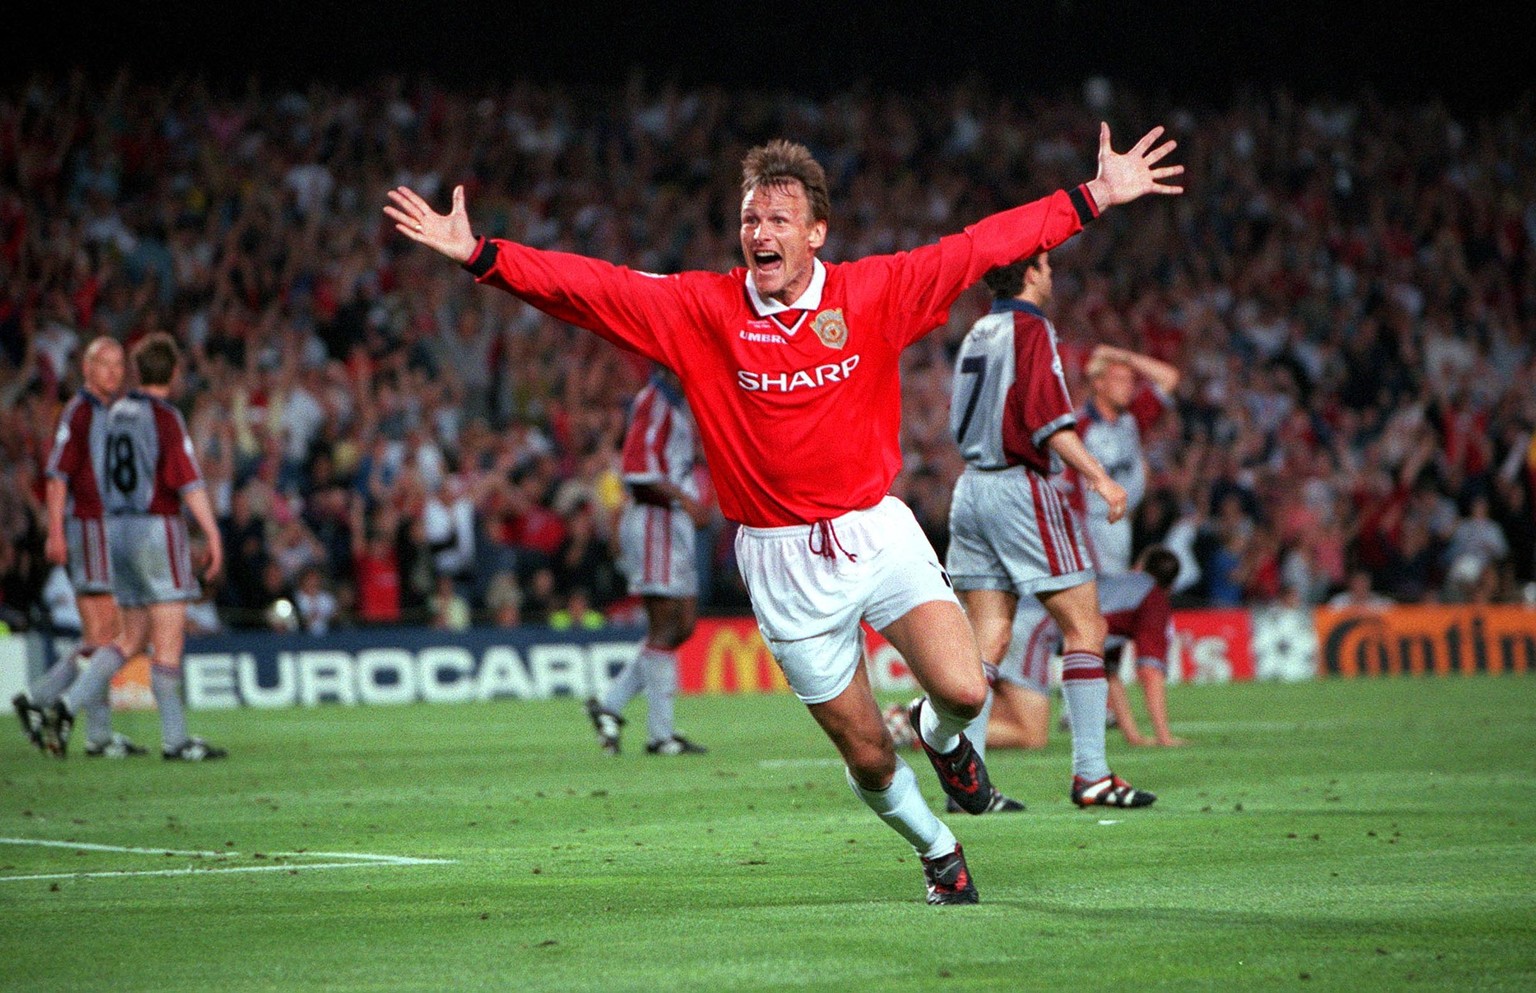 26th MAY 1999, UEFA Champions League Final, Barcelona, Spain, Manchester United 2 v Bayern Munich 1, Manchester United&#039;s Teddy Sheringham celebrates after scoring his late equalising goal (Photo  ...